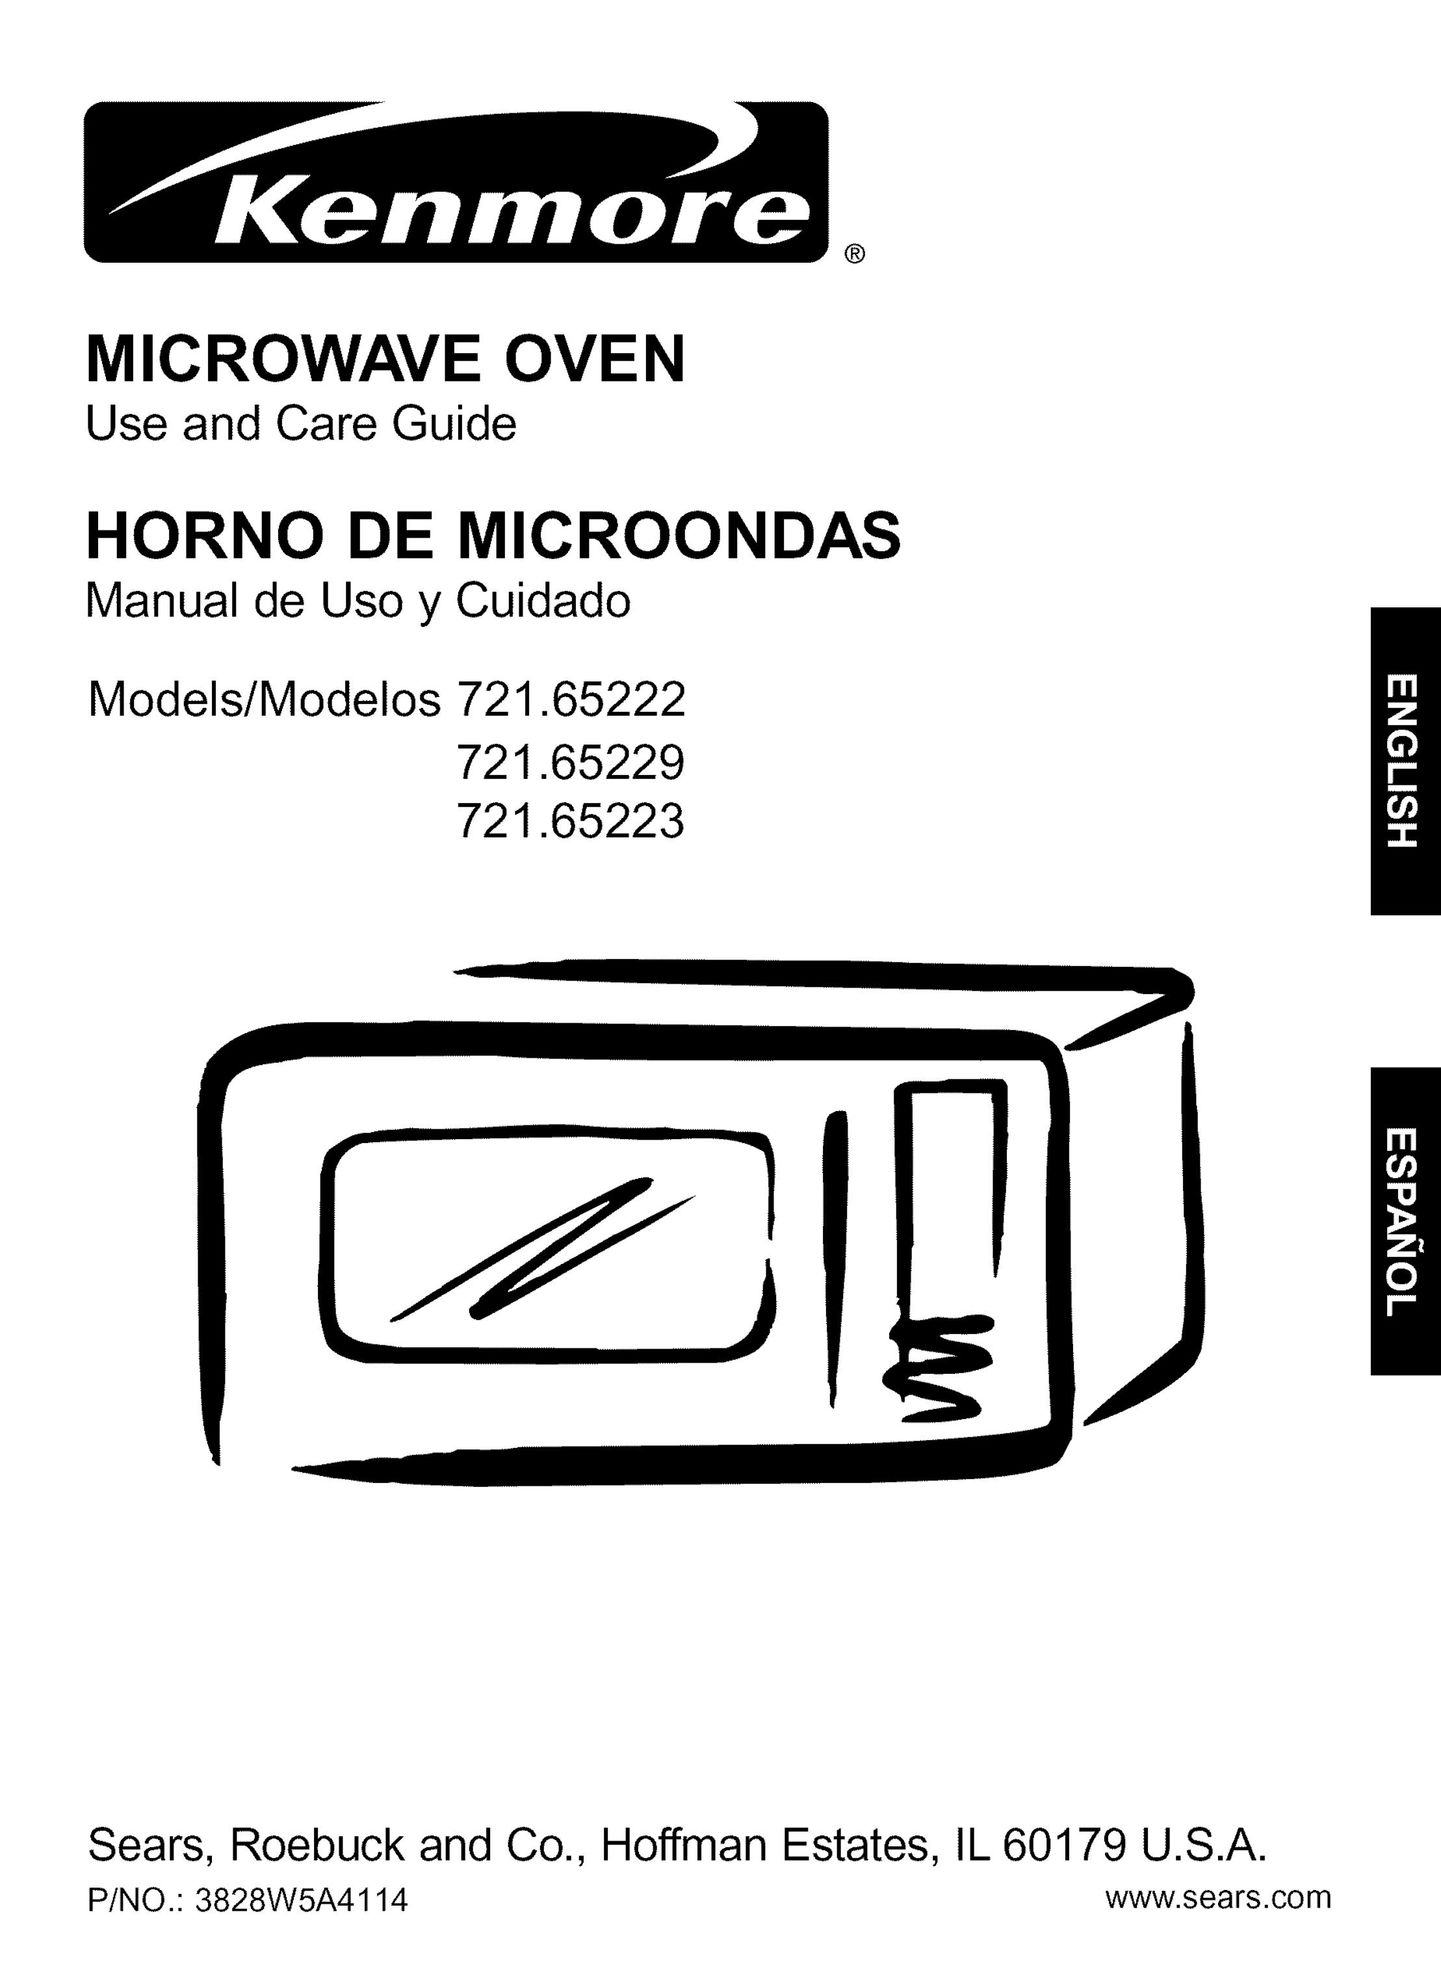 Kenmore 721.65229 Microwave Oven User Manual